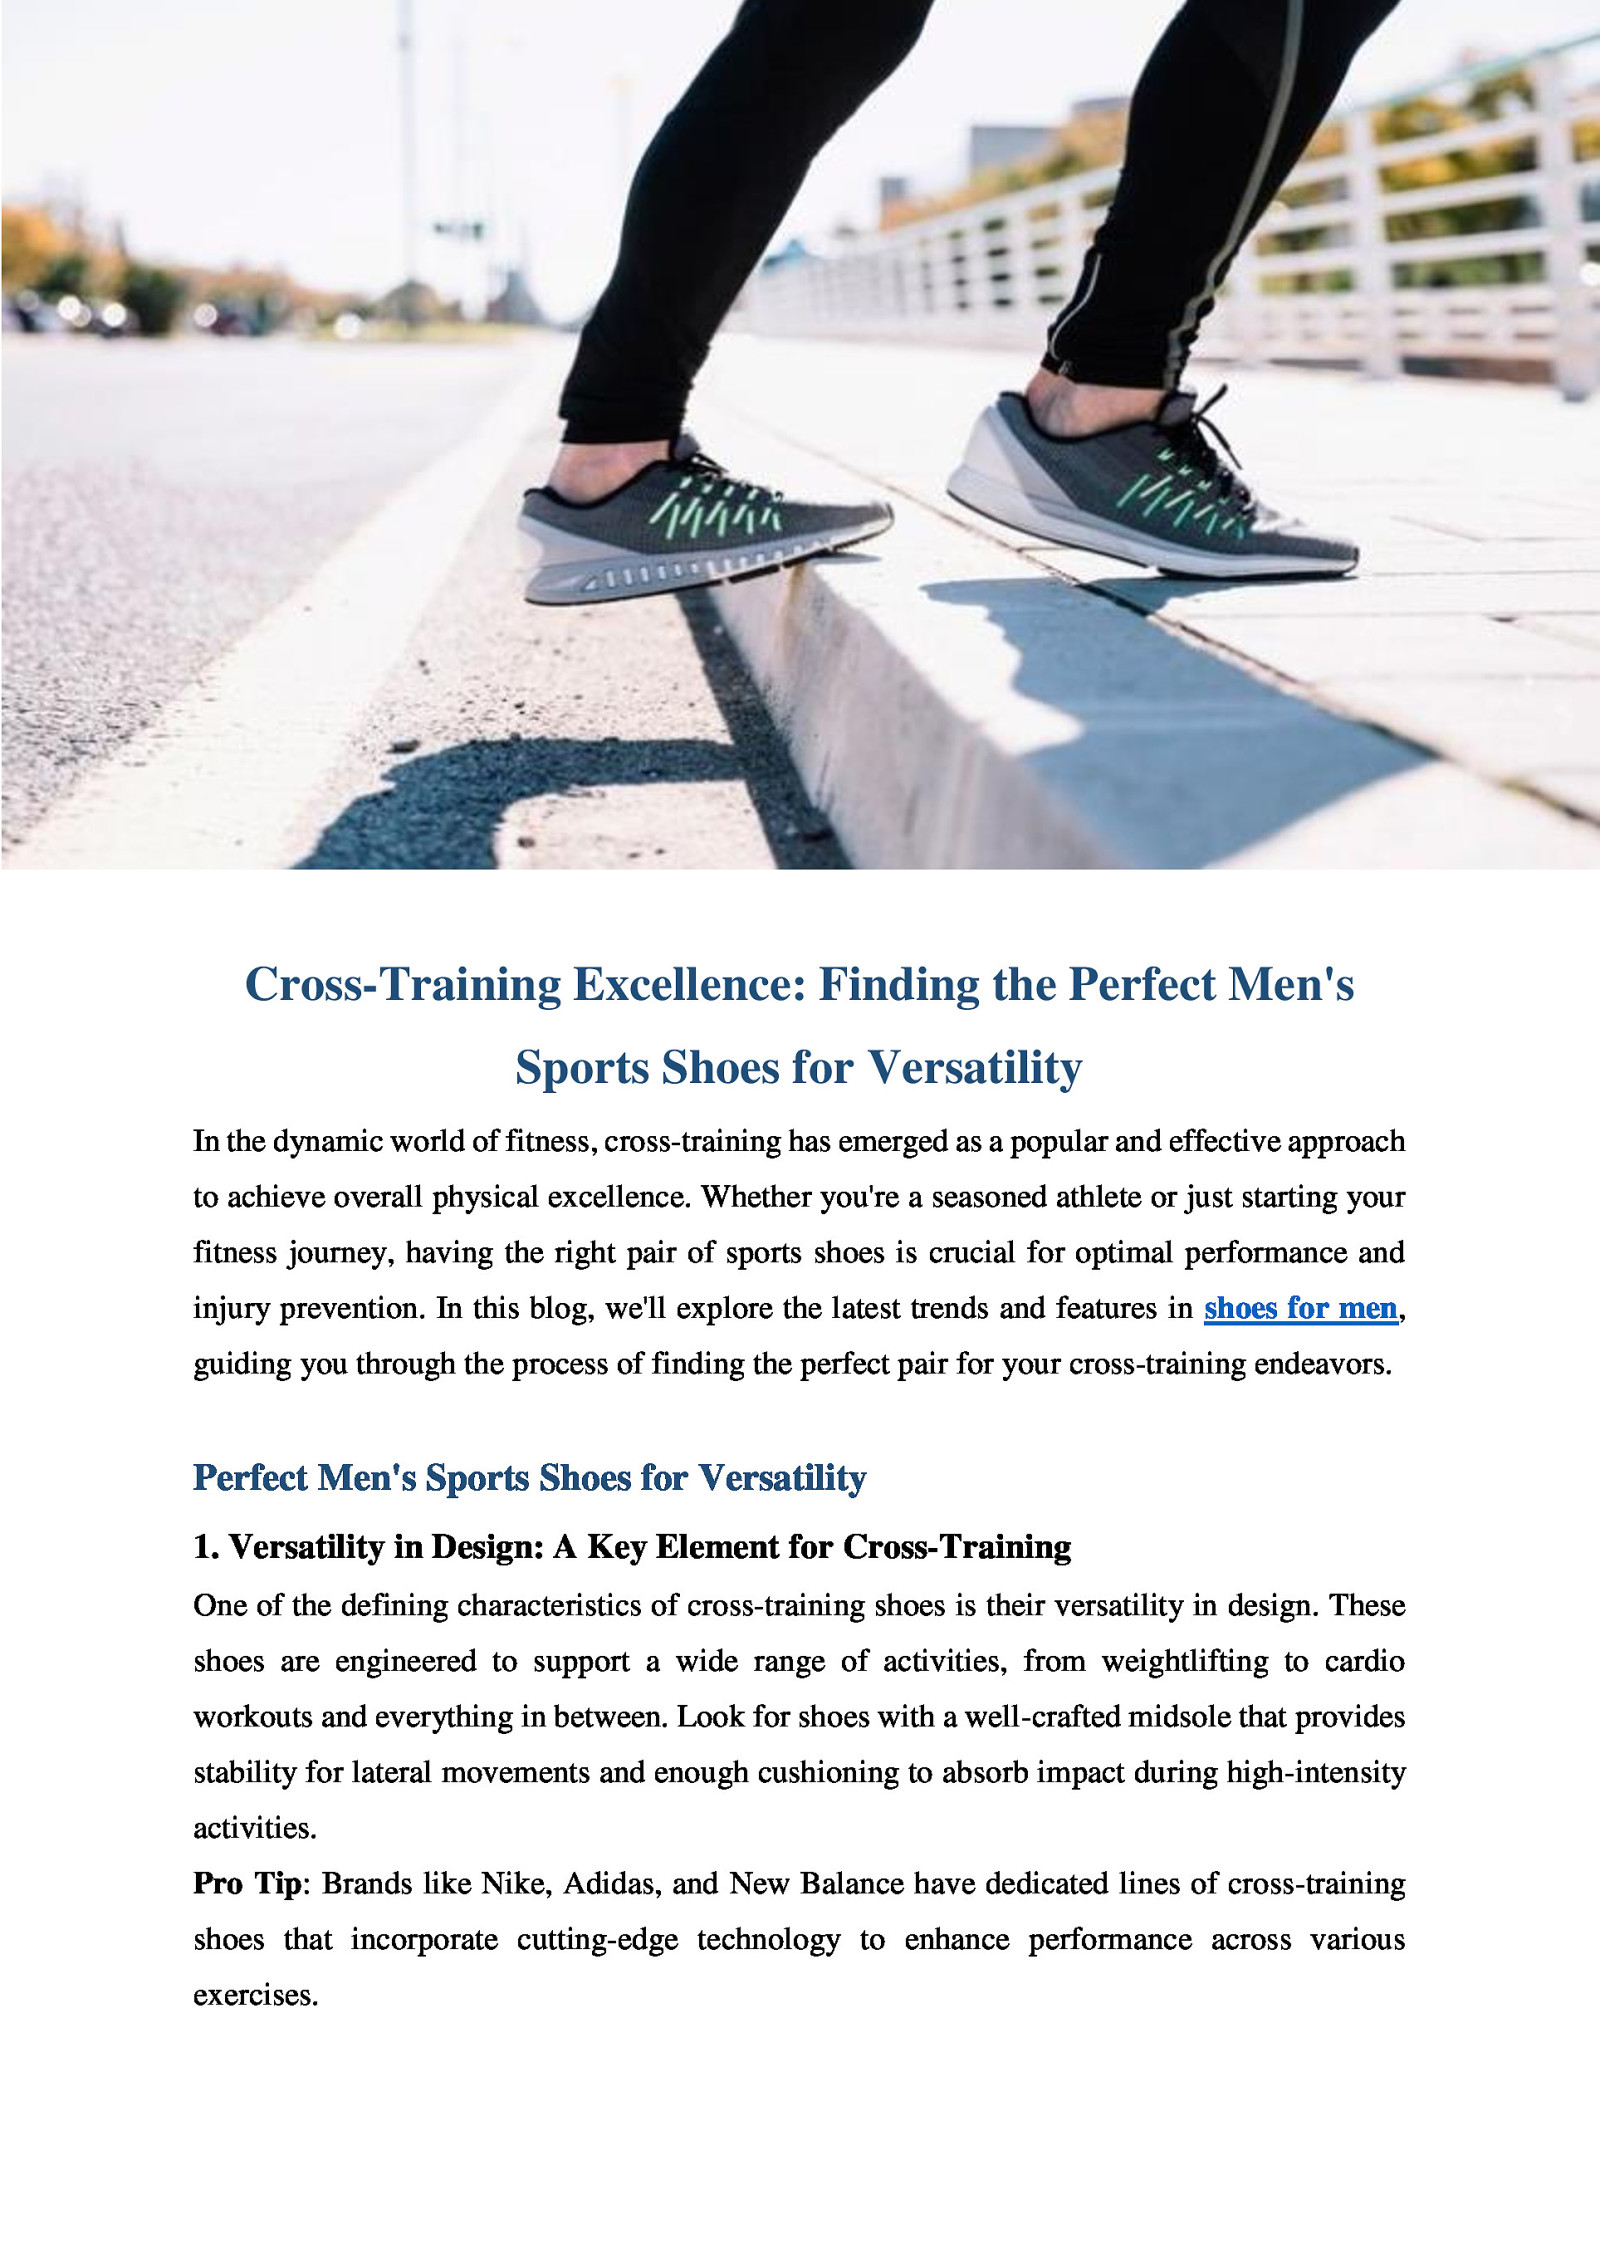 Cross-Training Excellence: Finding the Perfect Men’s Sports Shoes for Versatility